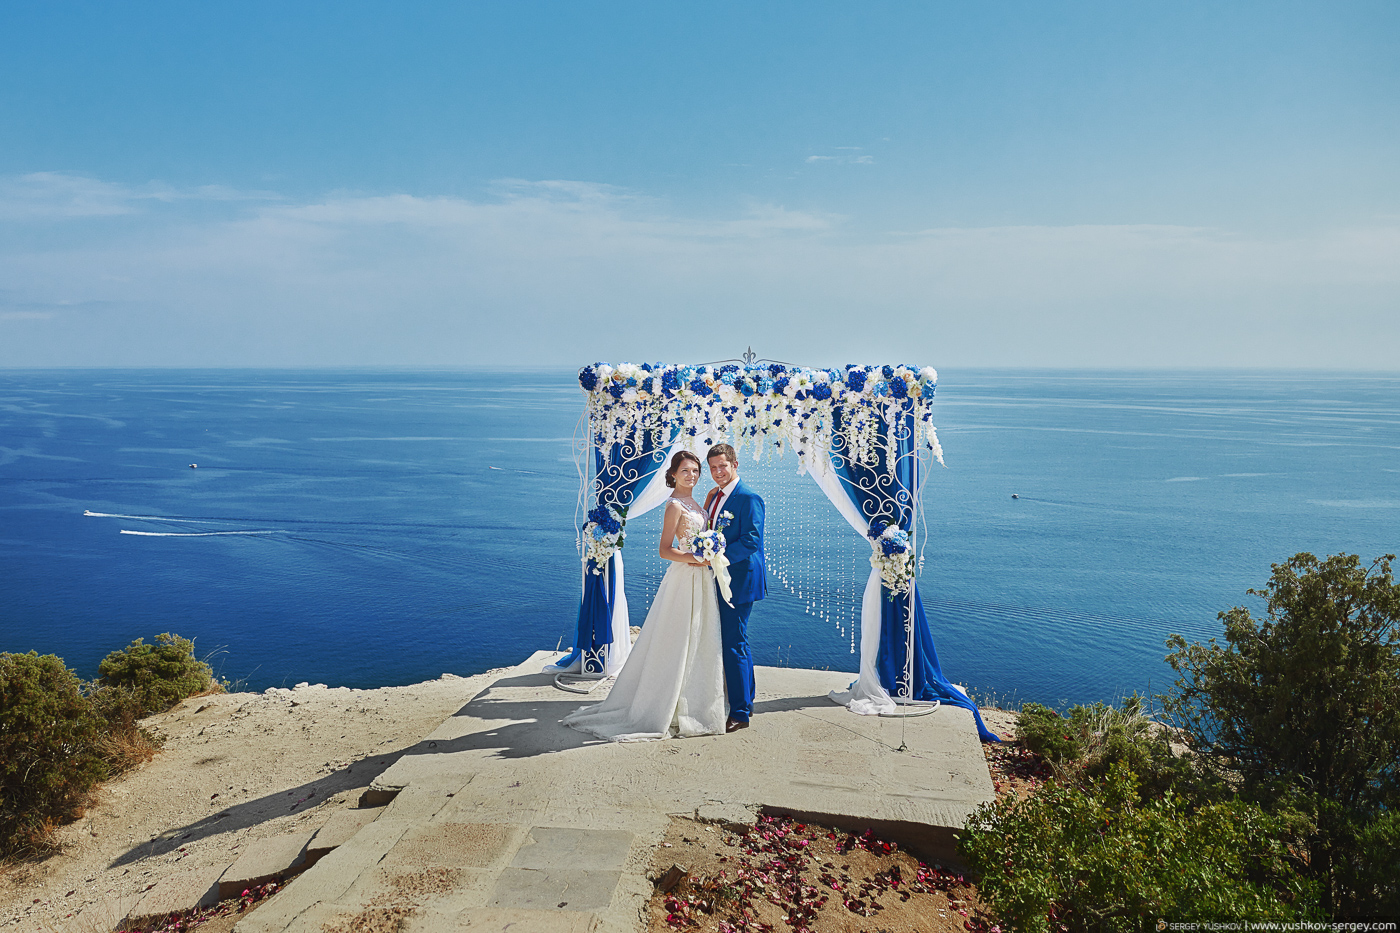 Wedding for two in the Crimea.